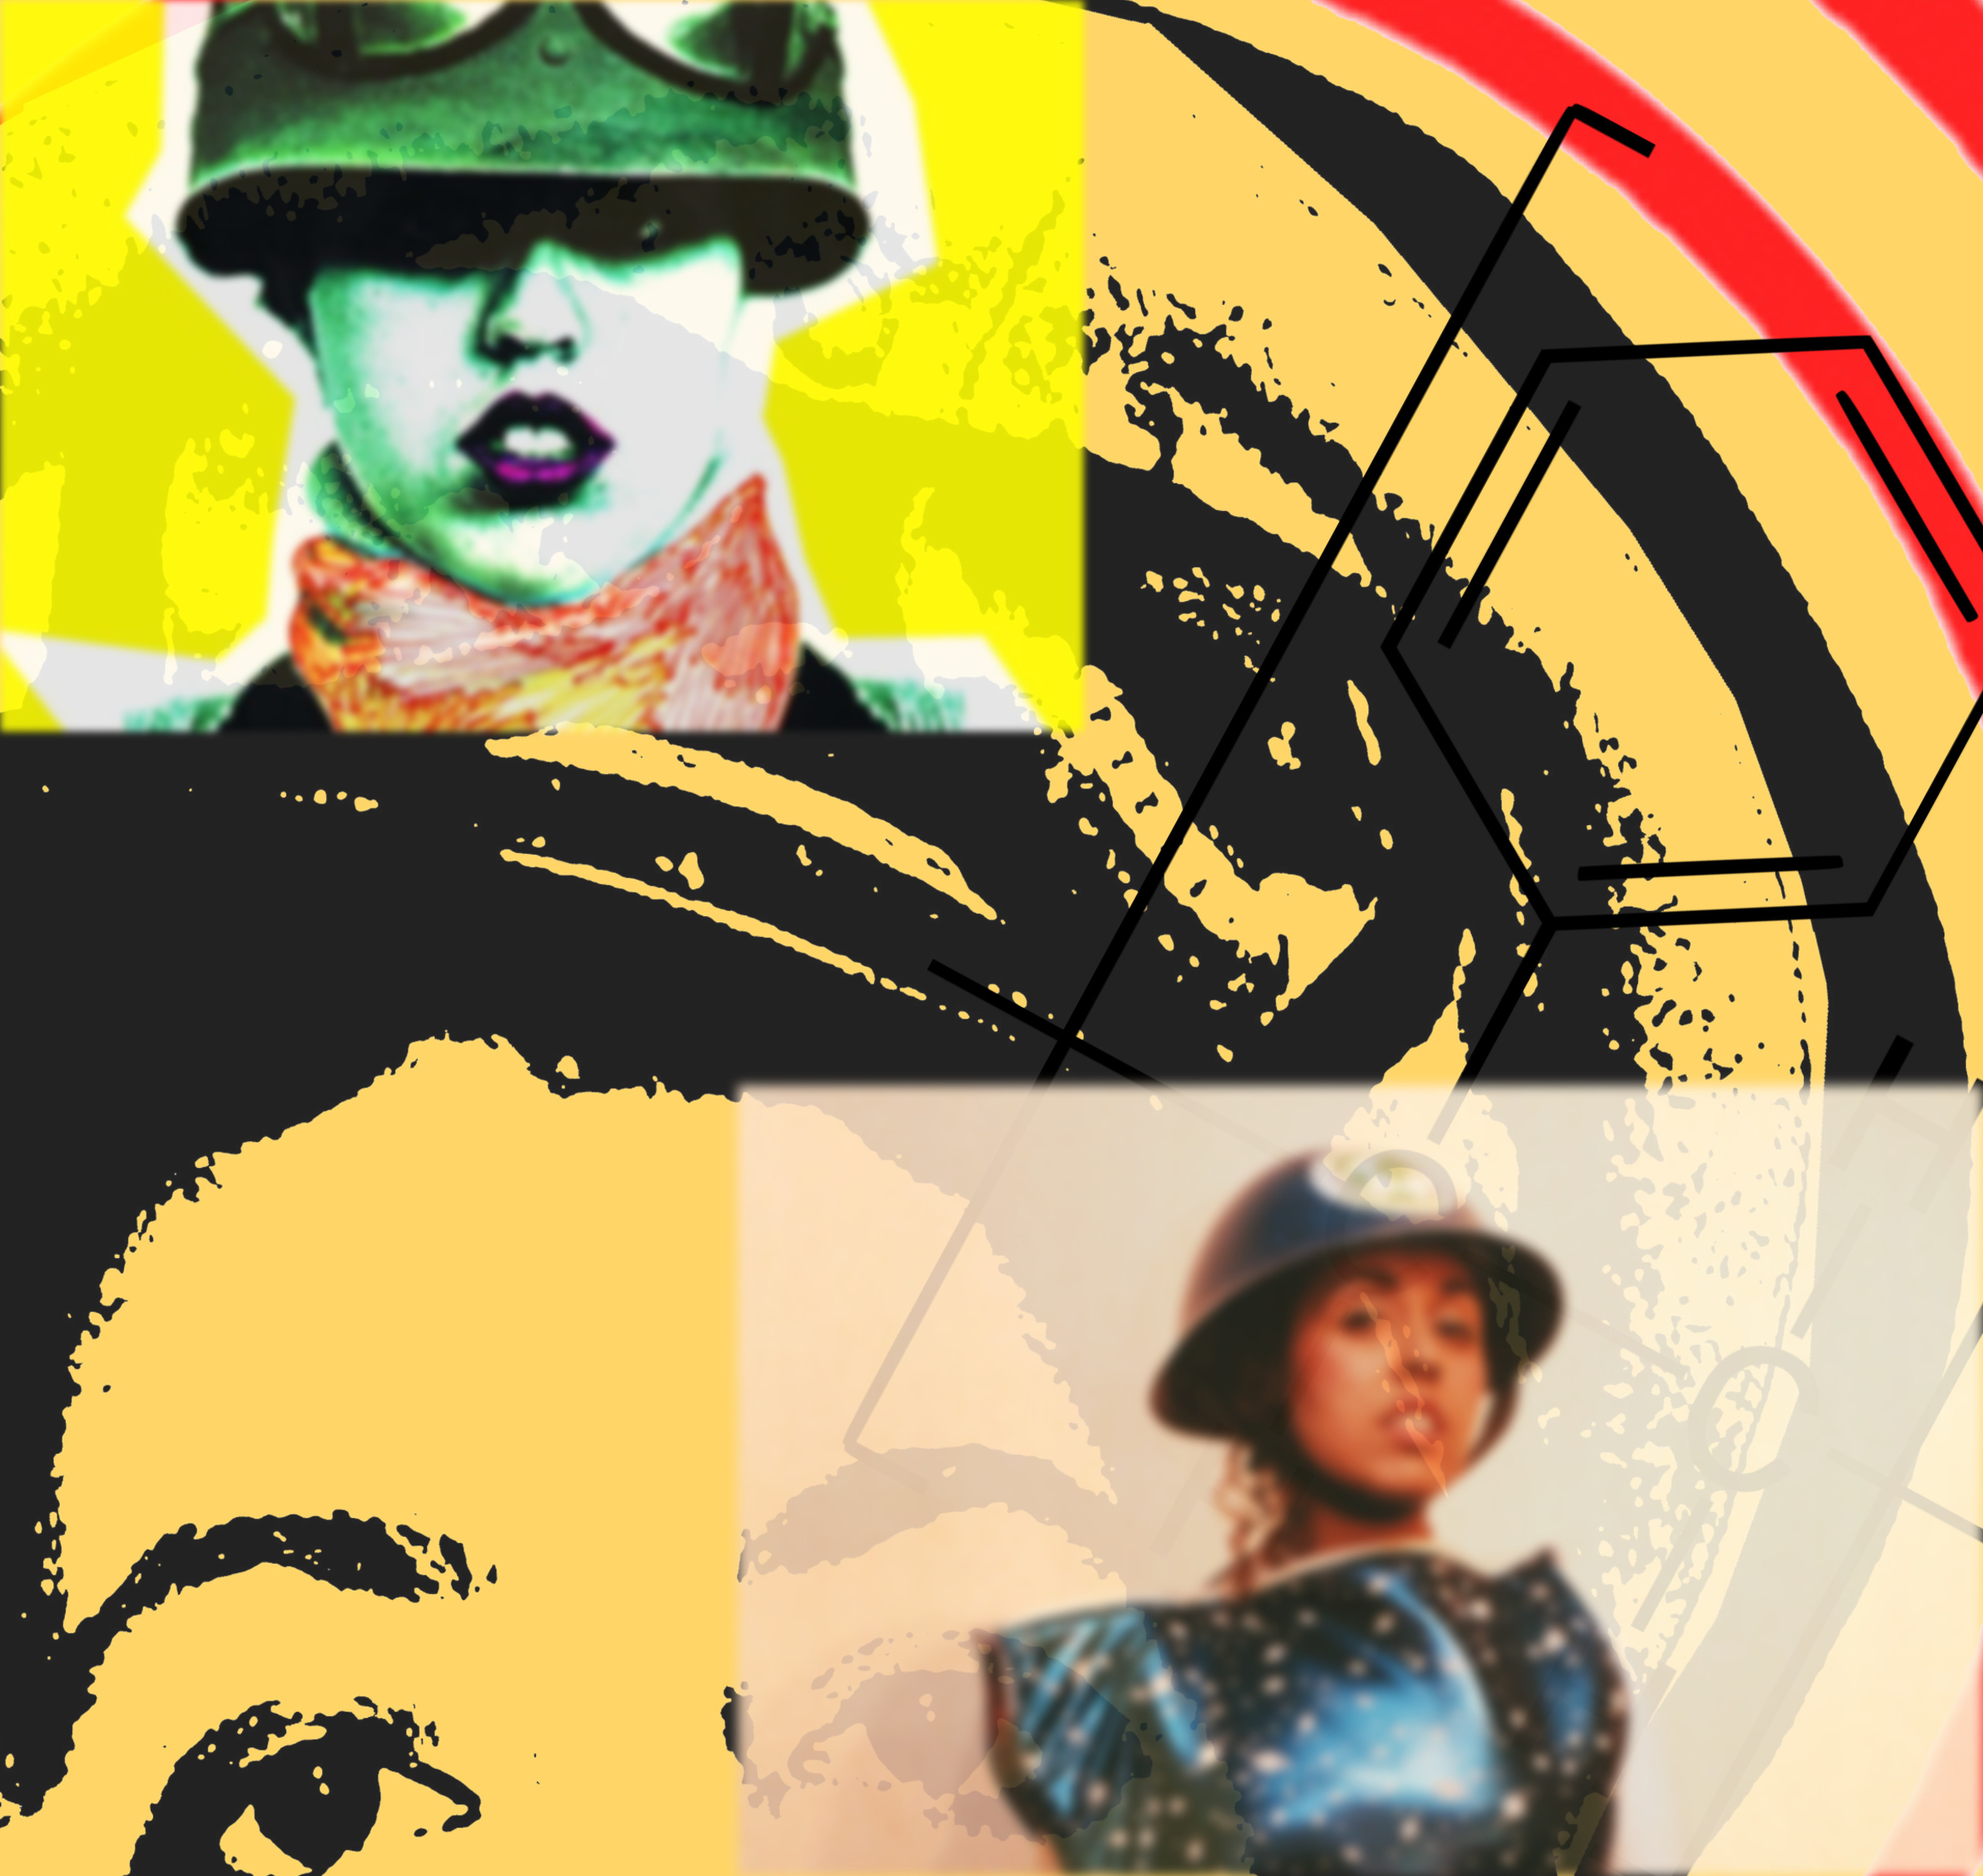 Poly Styrene: (in)disposable punk